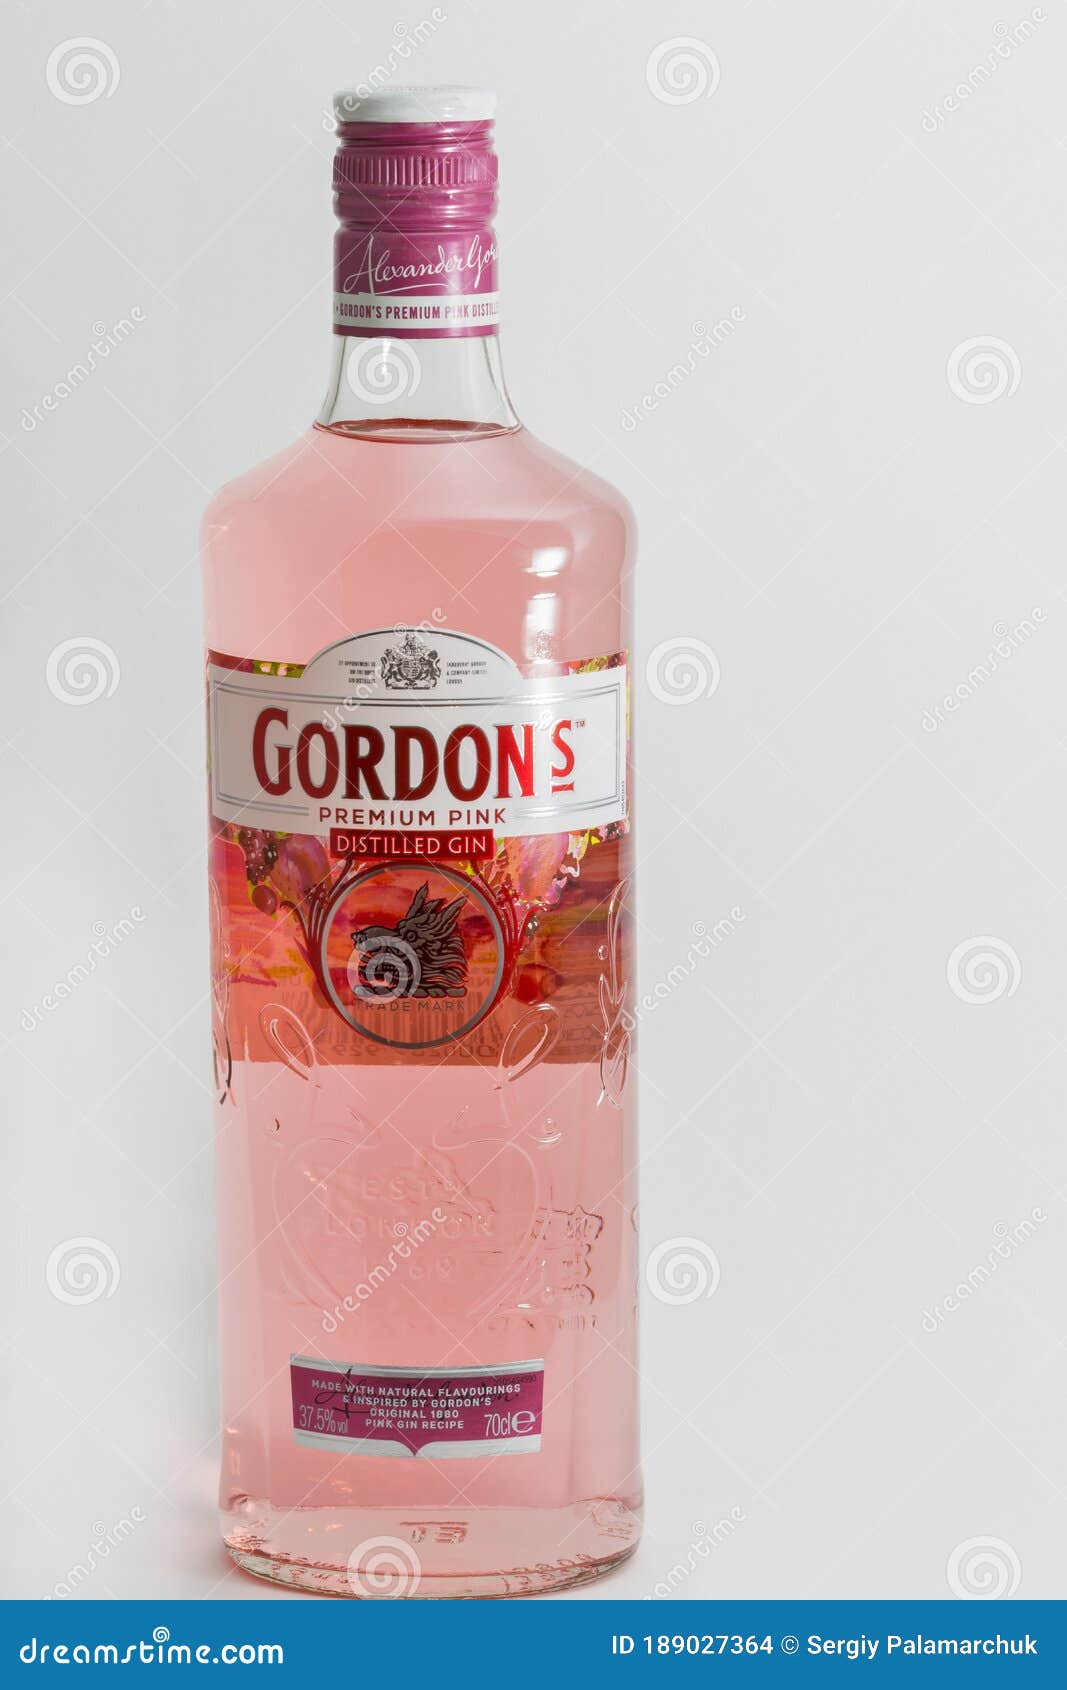 Download 6 010 Gin Bottle Photos Free Royalty Free Stock Photos From Dreamstime